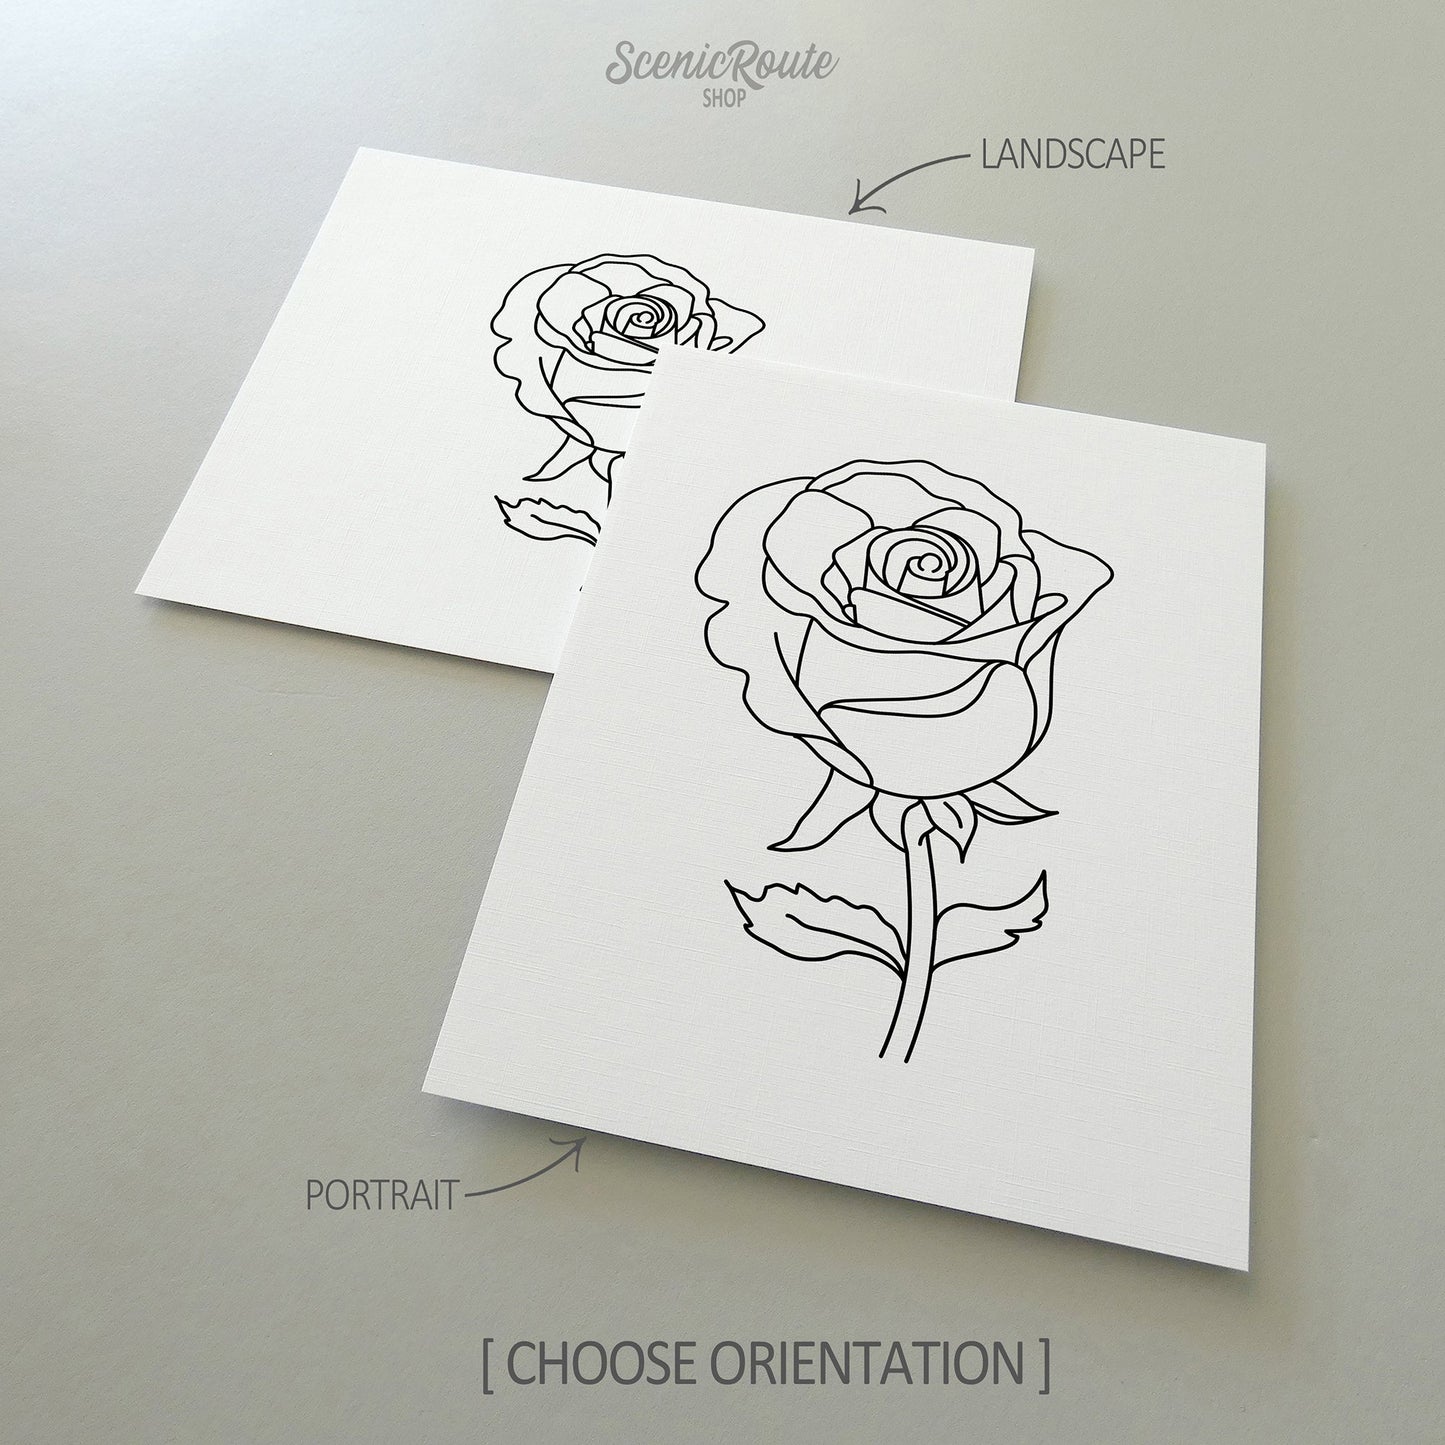 Two line art drawings of a Rose Flower on white linen paper with a gray background.  The pieces are shown in portrait and landscape orientation for the available art print options.